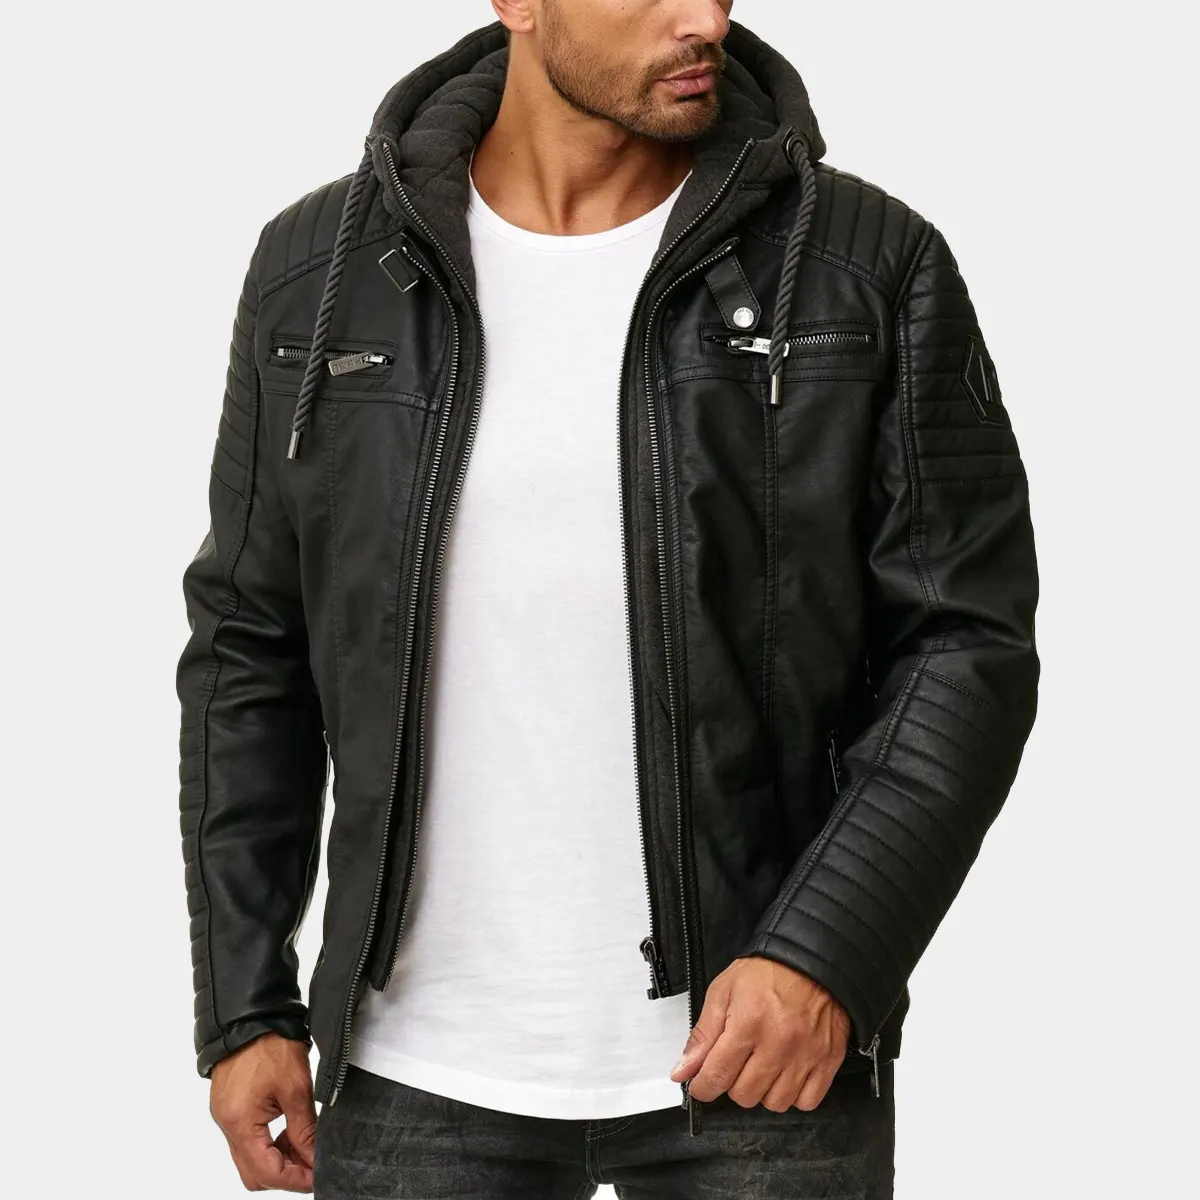 Real Black Leather Jacket Removable Hoodie